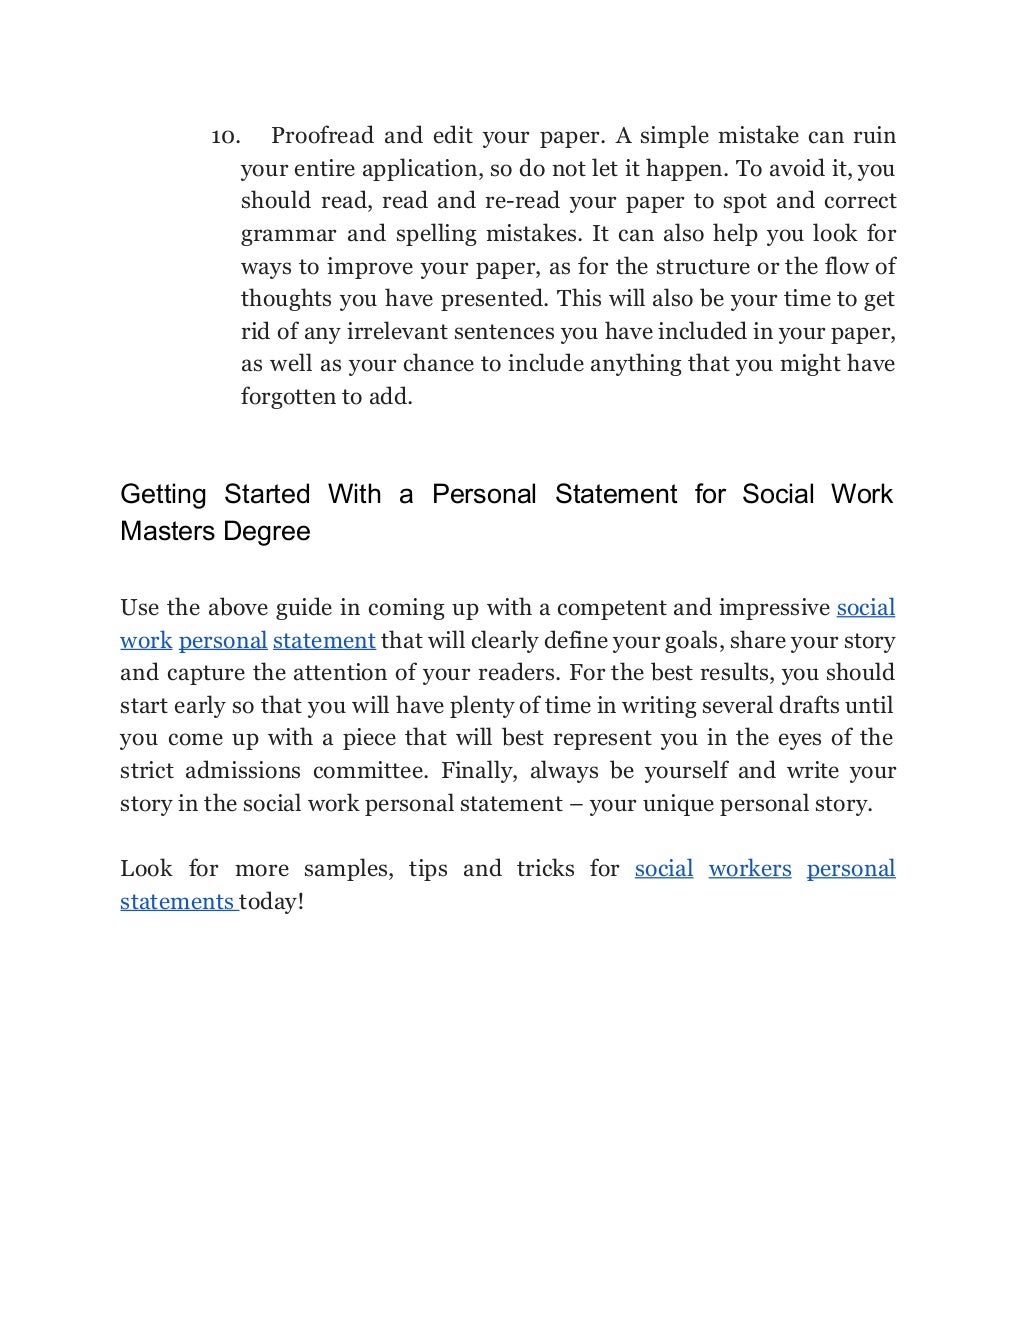 personal statement for newly qualified social worker